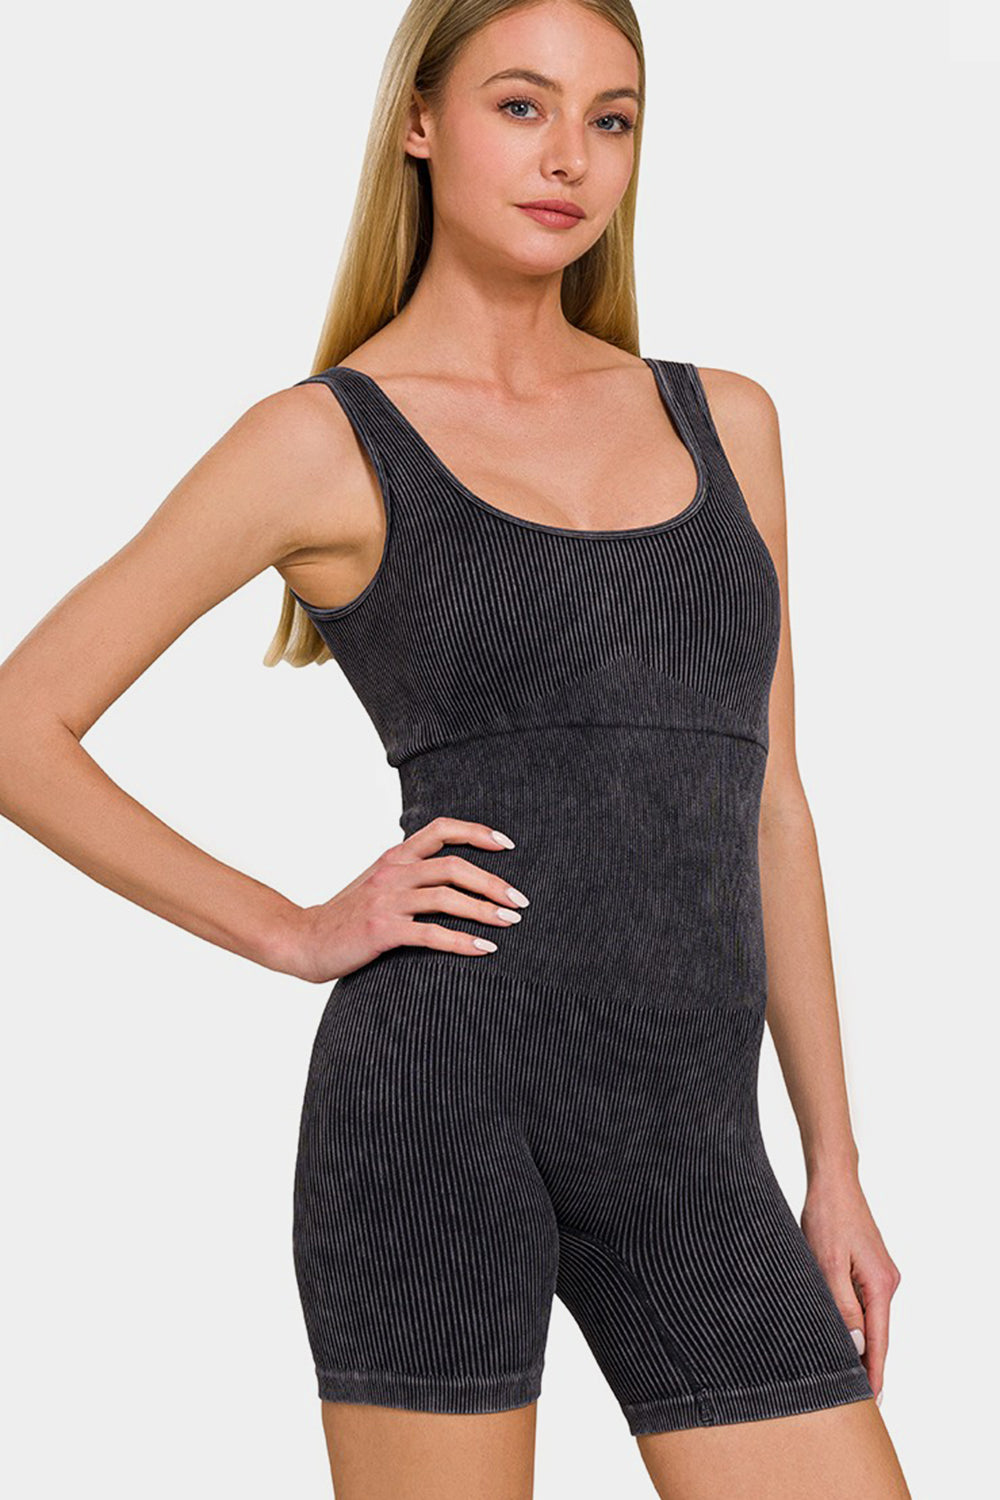 Zenana Washed Ribbed Romper with Pad Sunset and Swim Black S/M 